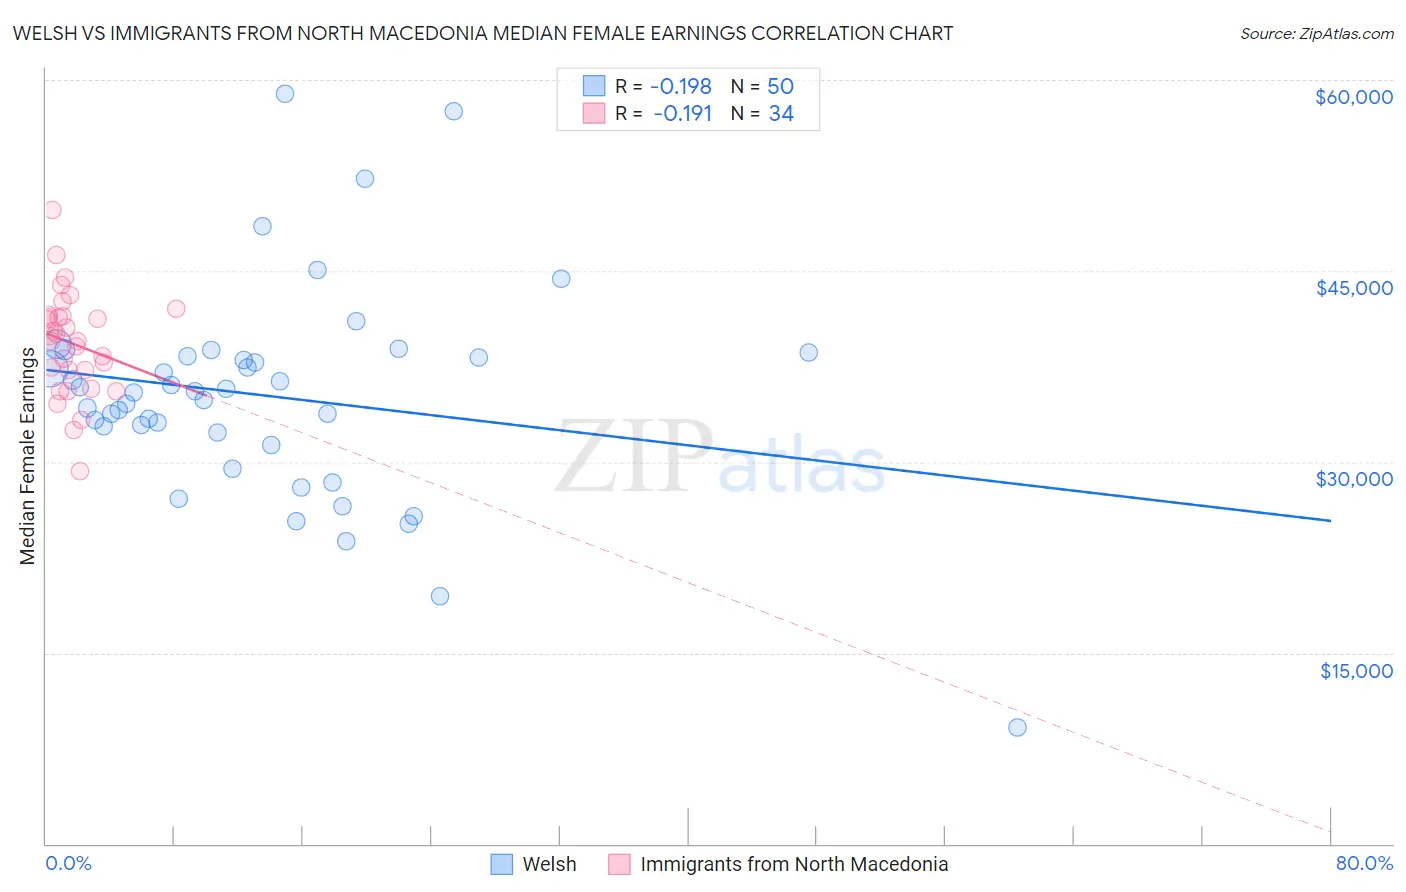 Welsh vs Immigrants from North Macedonia Median Female Earnings